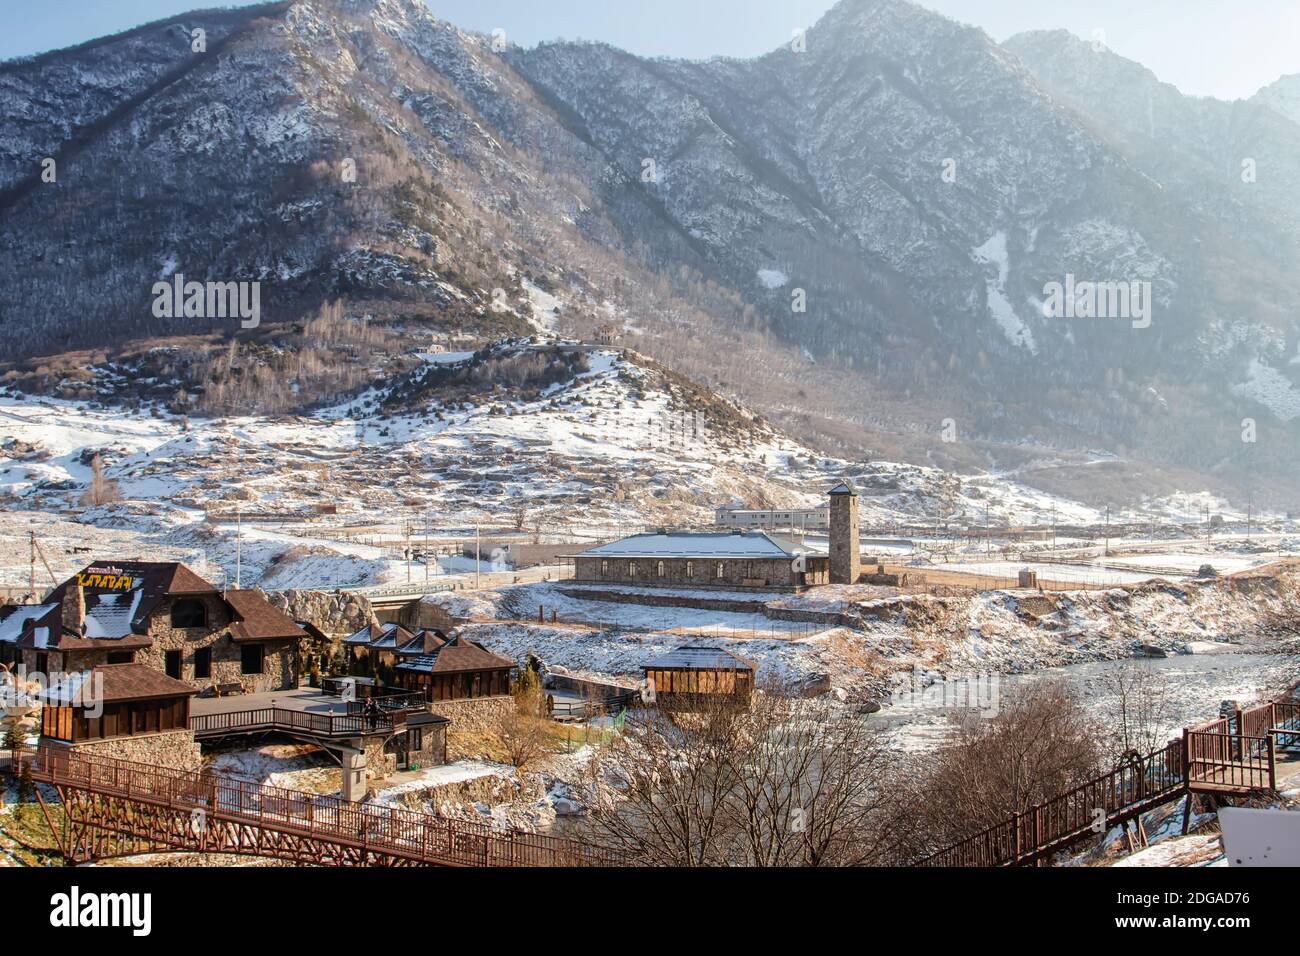 View of the village with cafes and hotels located in the mountain tourist center near the ruins of a Stock Photo